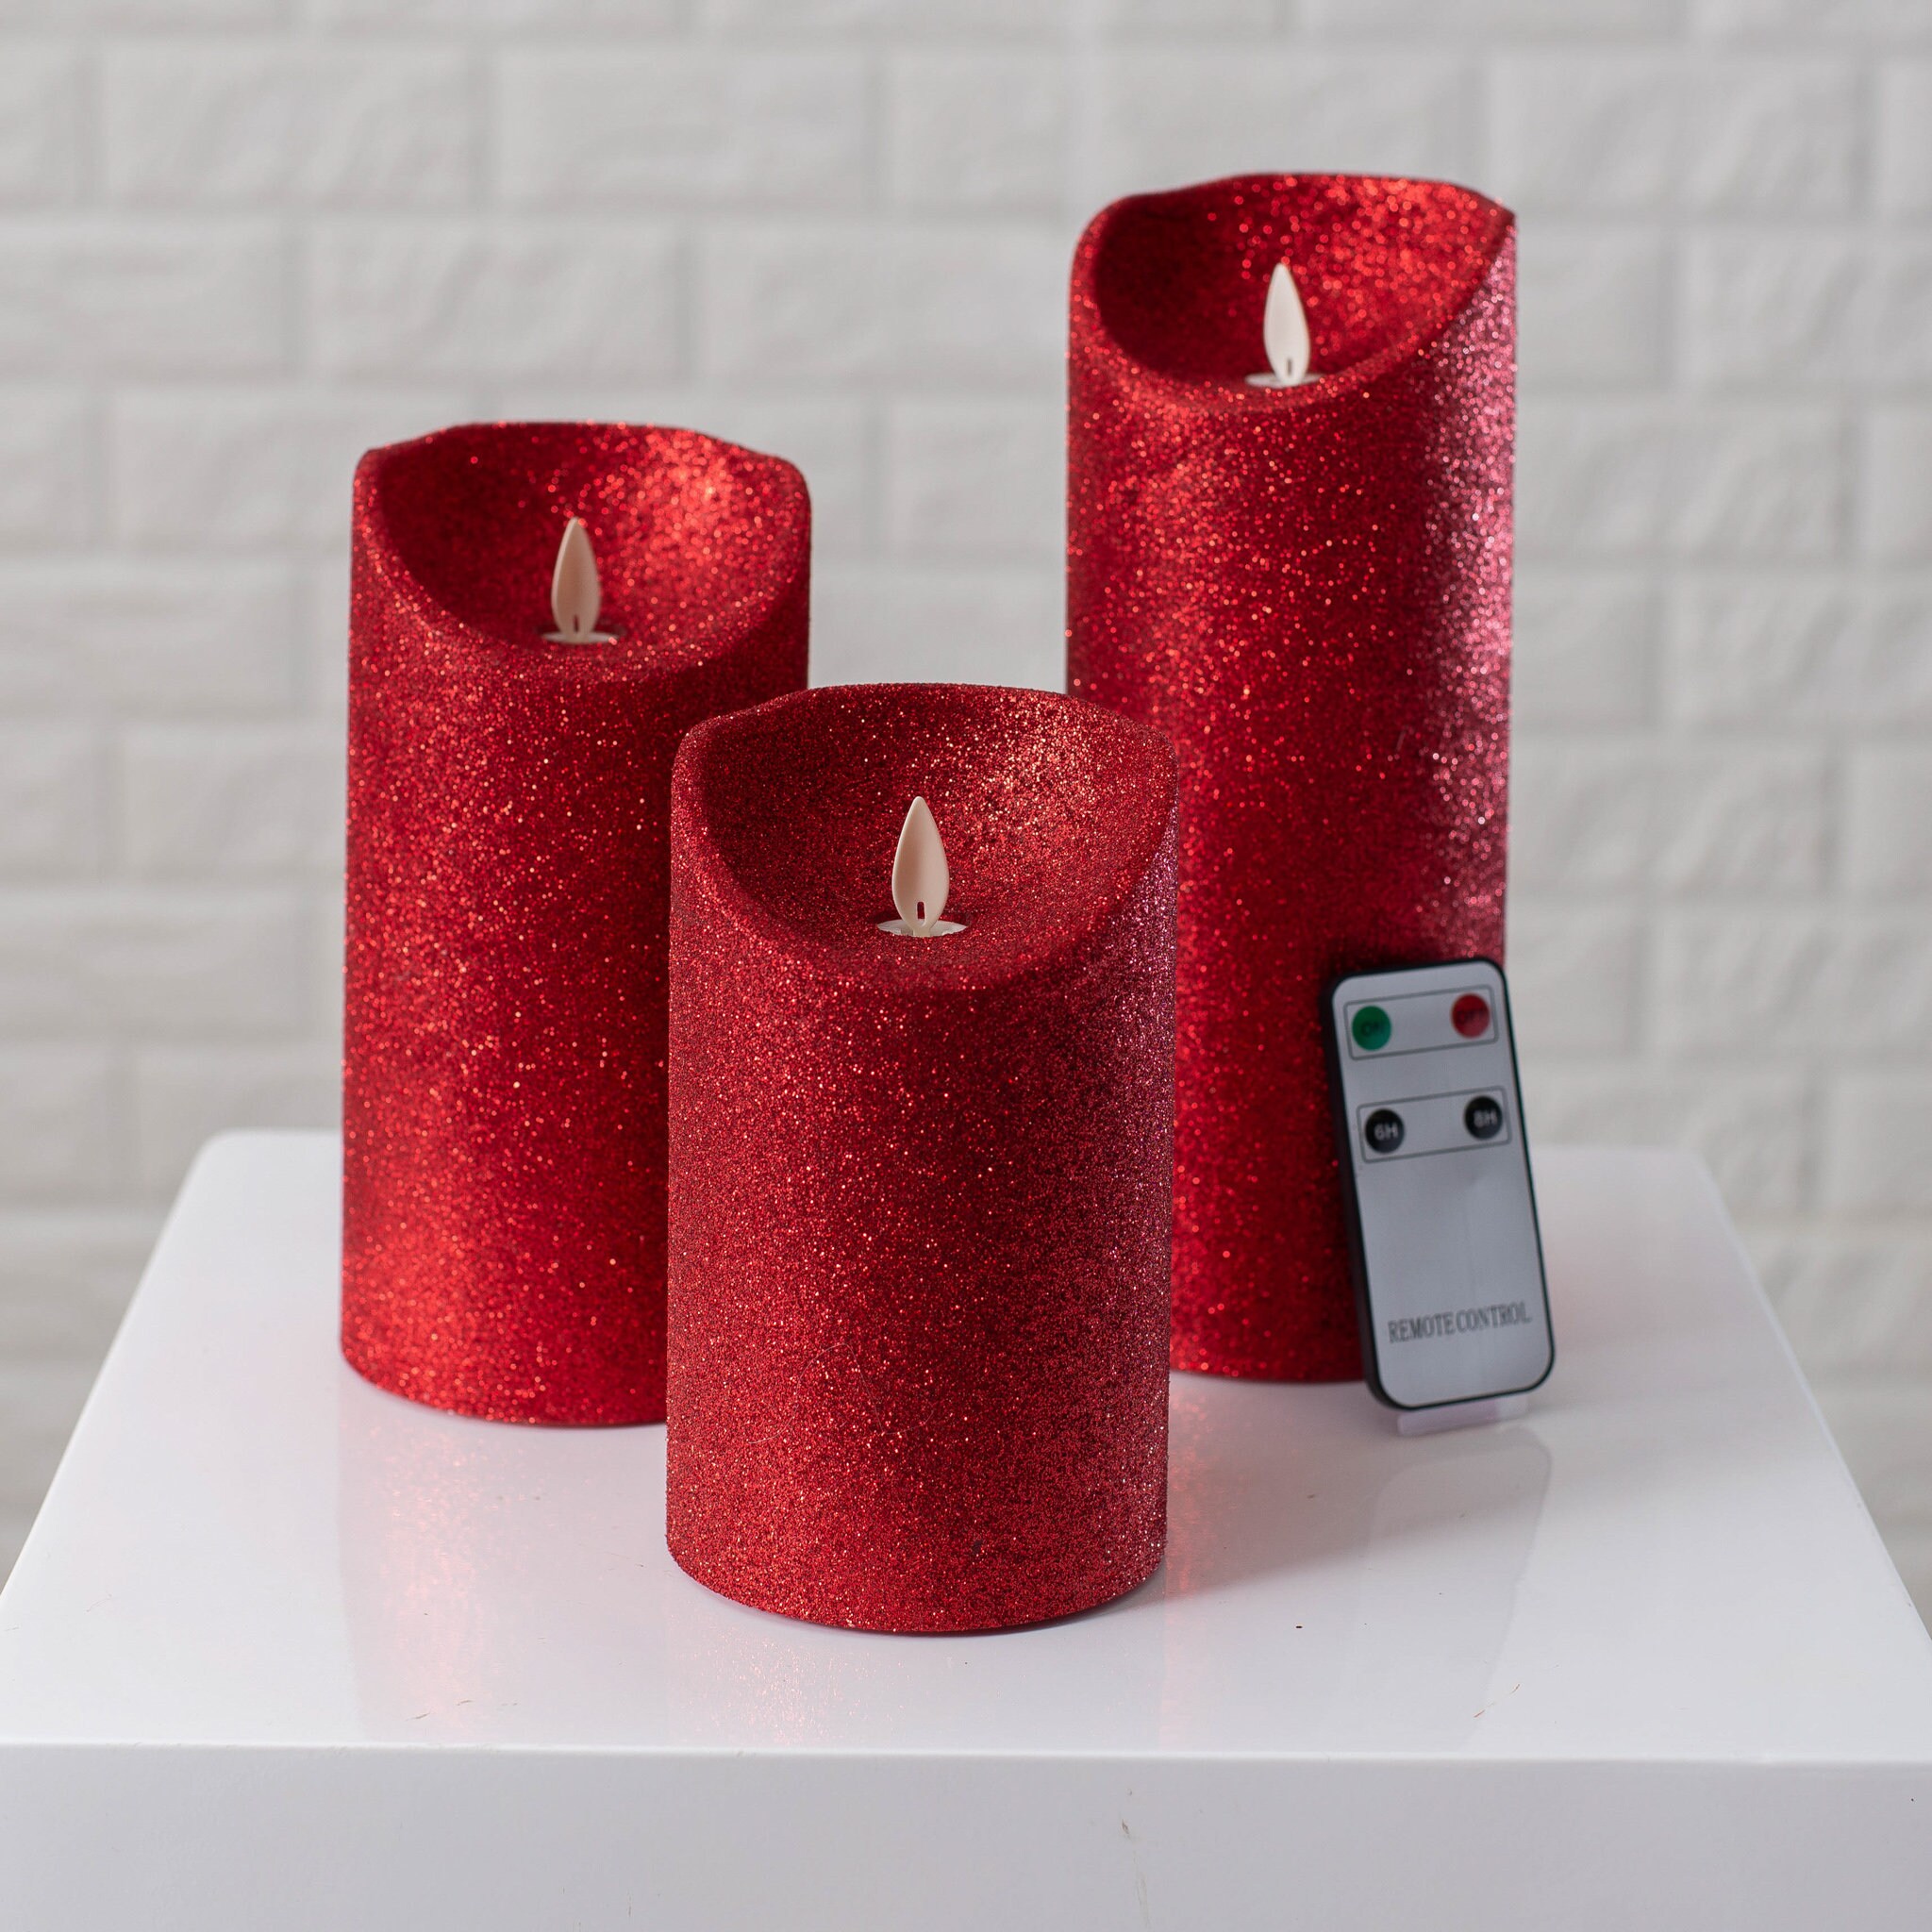 LED Water Candle with Glitter USB Rechargeable Color Changing Waterproof Swirling Glitter Flameless Candles for Xmas Party Home Decoration, Red